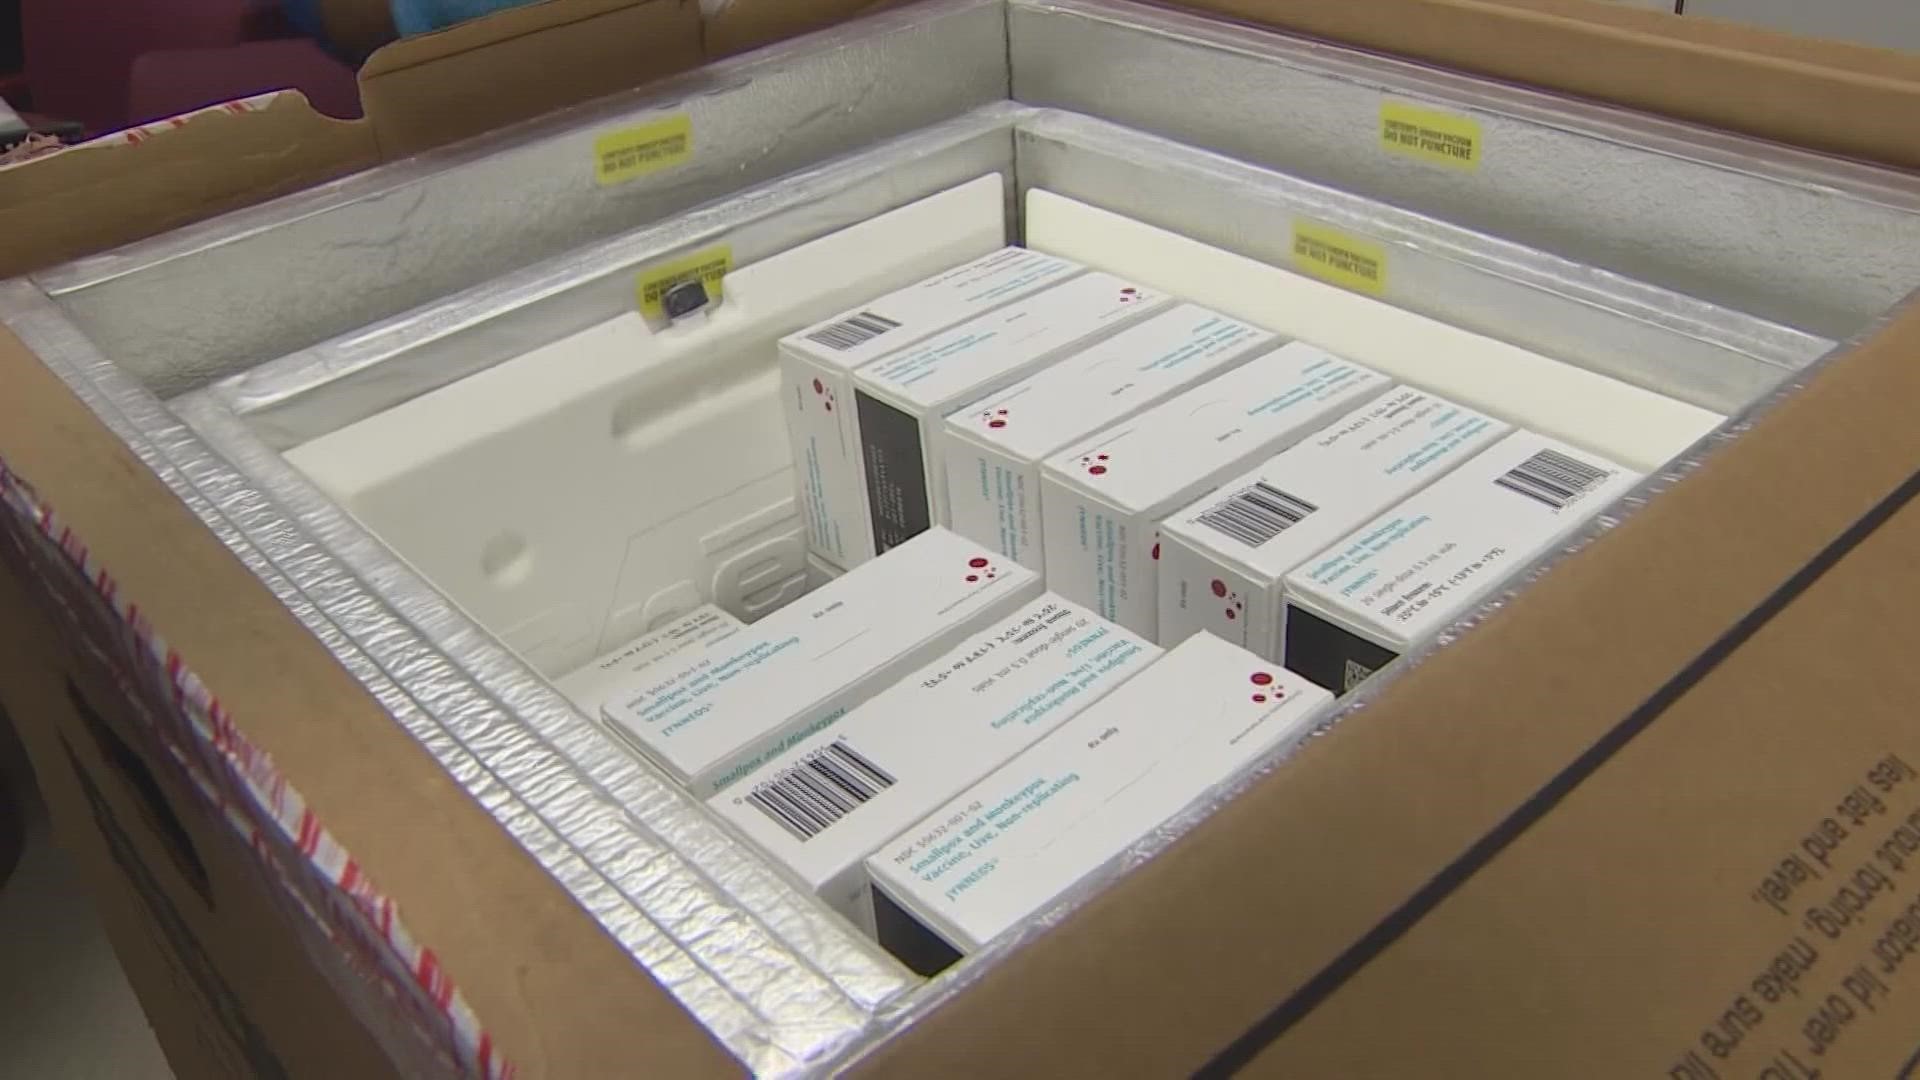 Houston received its third shipment of monkeypox vaccines on August 17. The shipment will be shared  between the Houston and Harris County Health Departments,